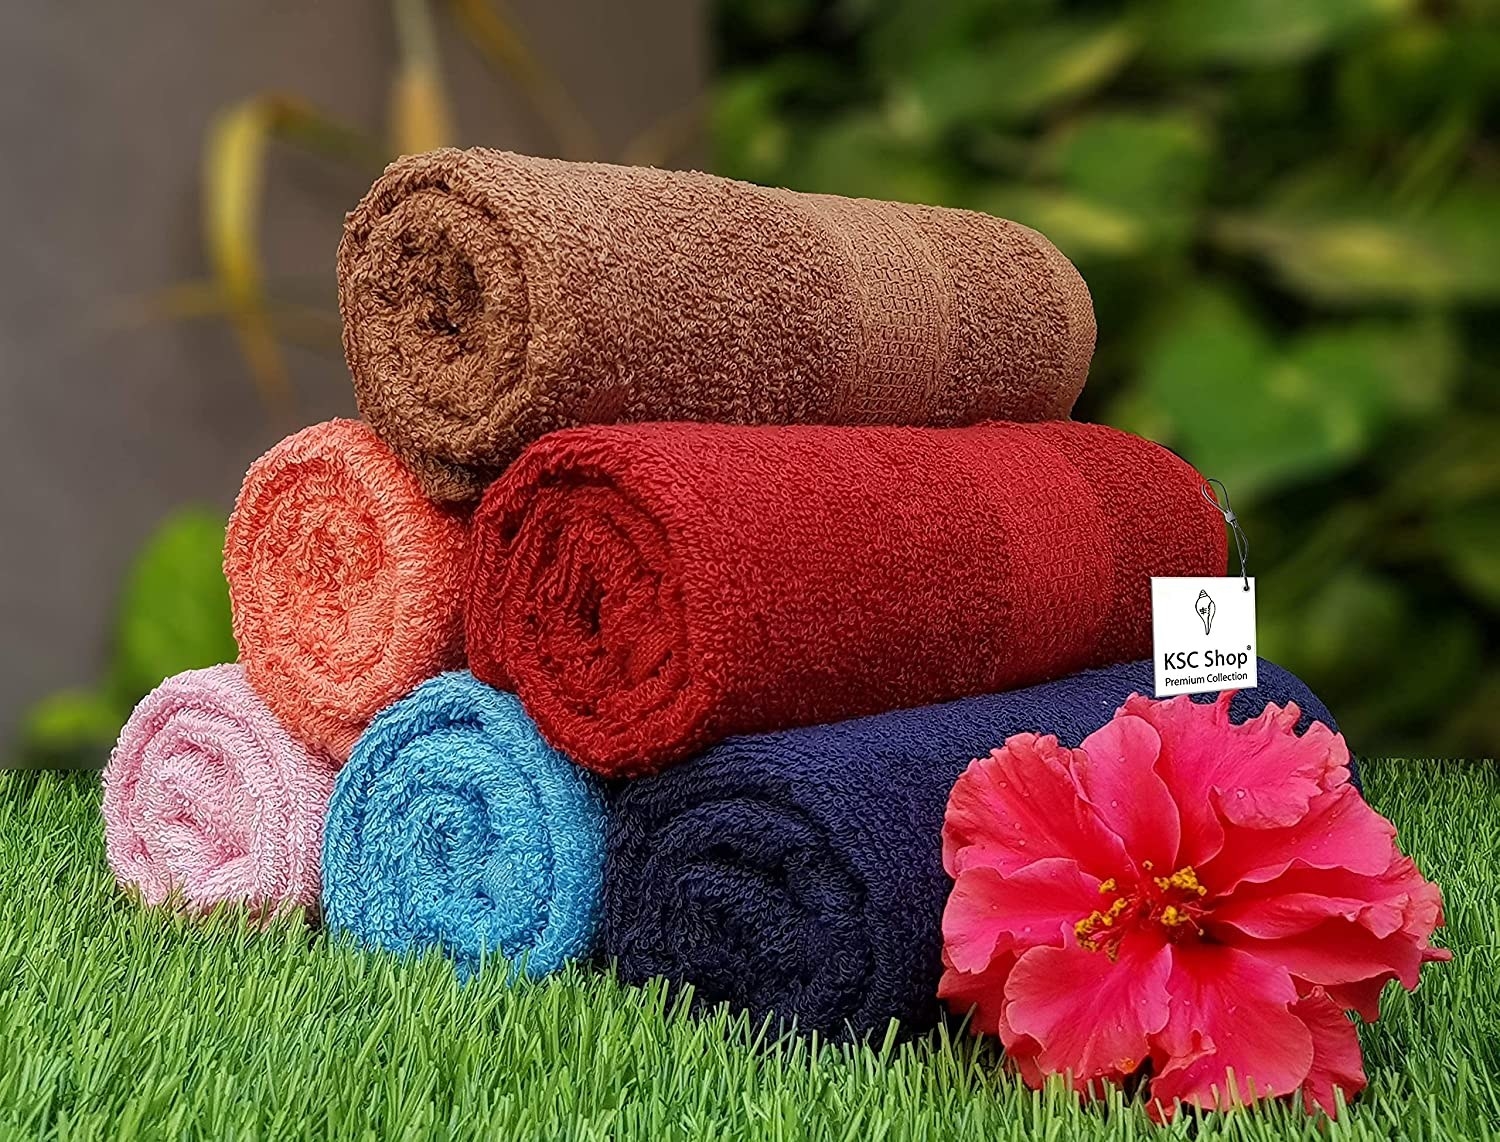 A set of towels on grass with a flower beside them